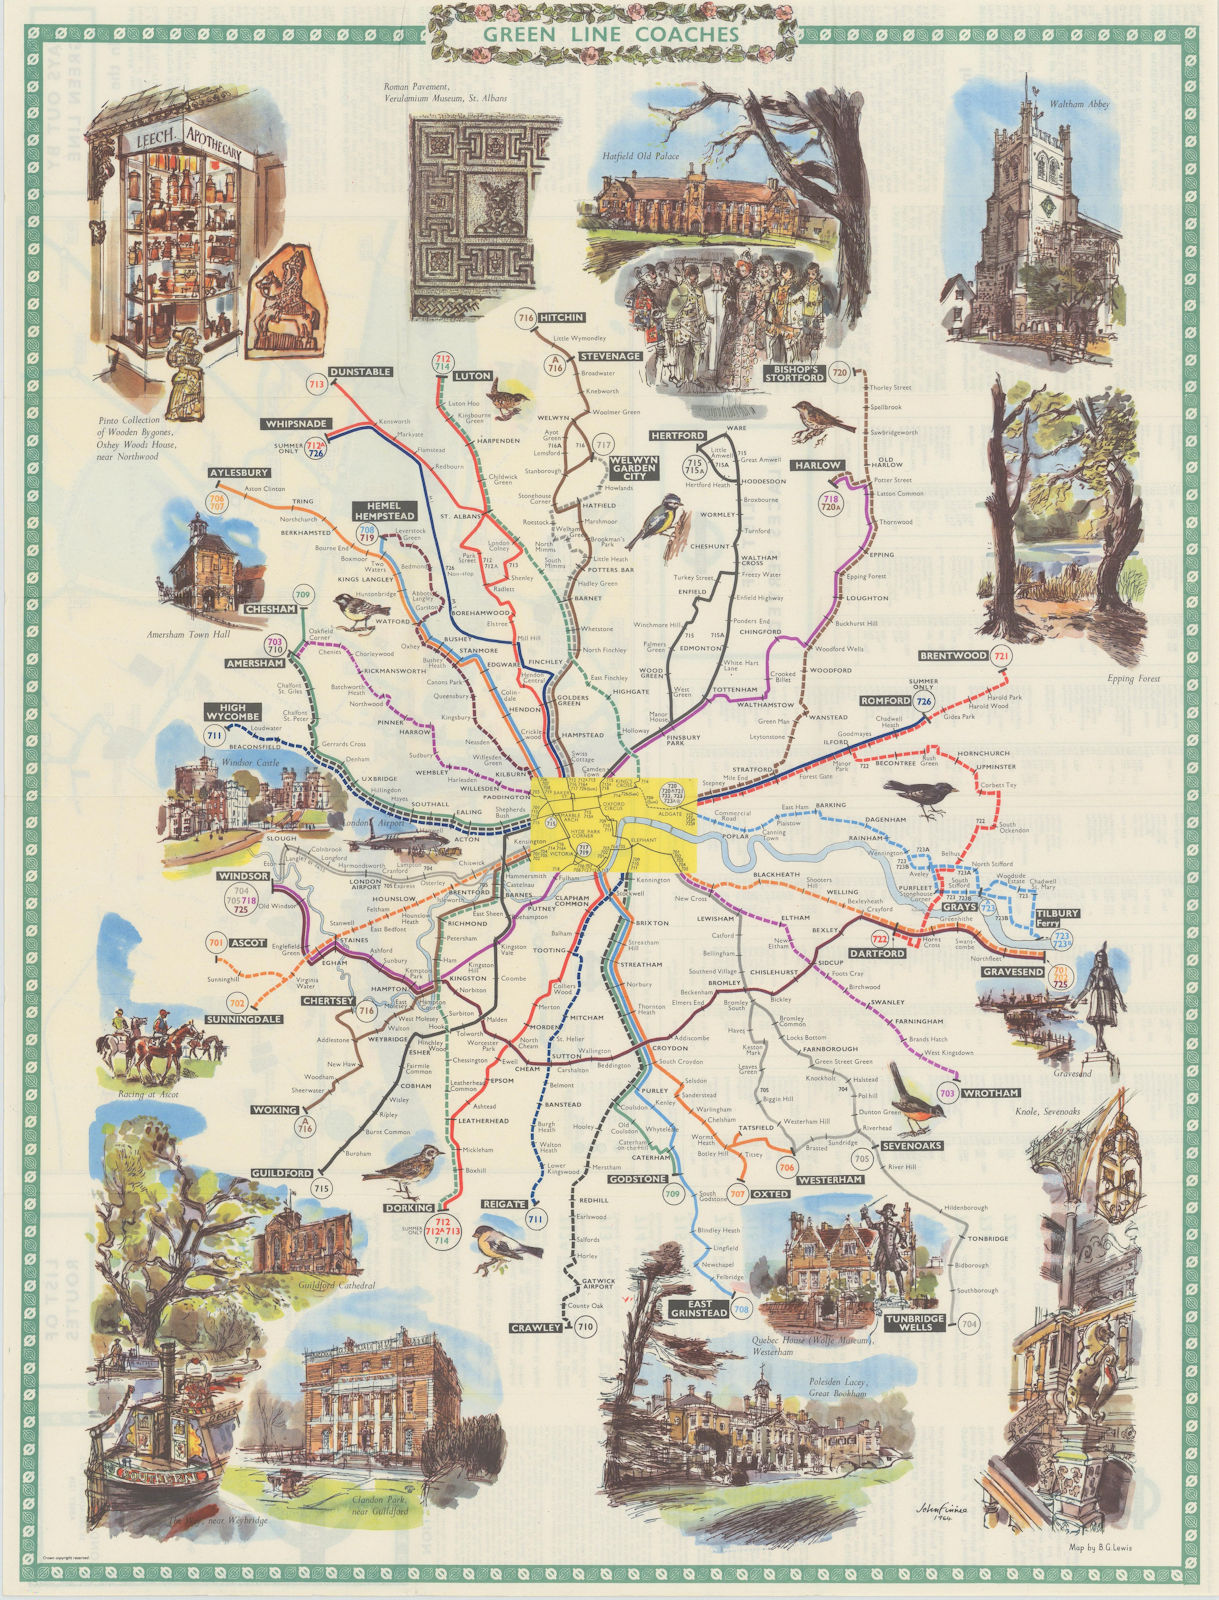 Associate Product London Transport Green Line Coach Routes. LEWIS #1 1964 old vintage map chart